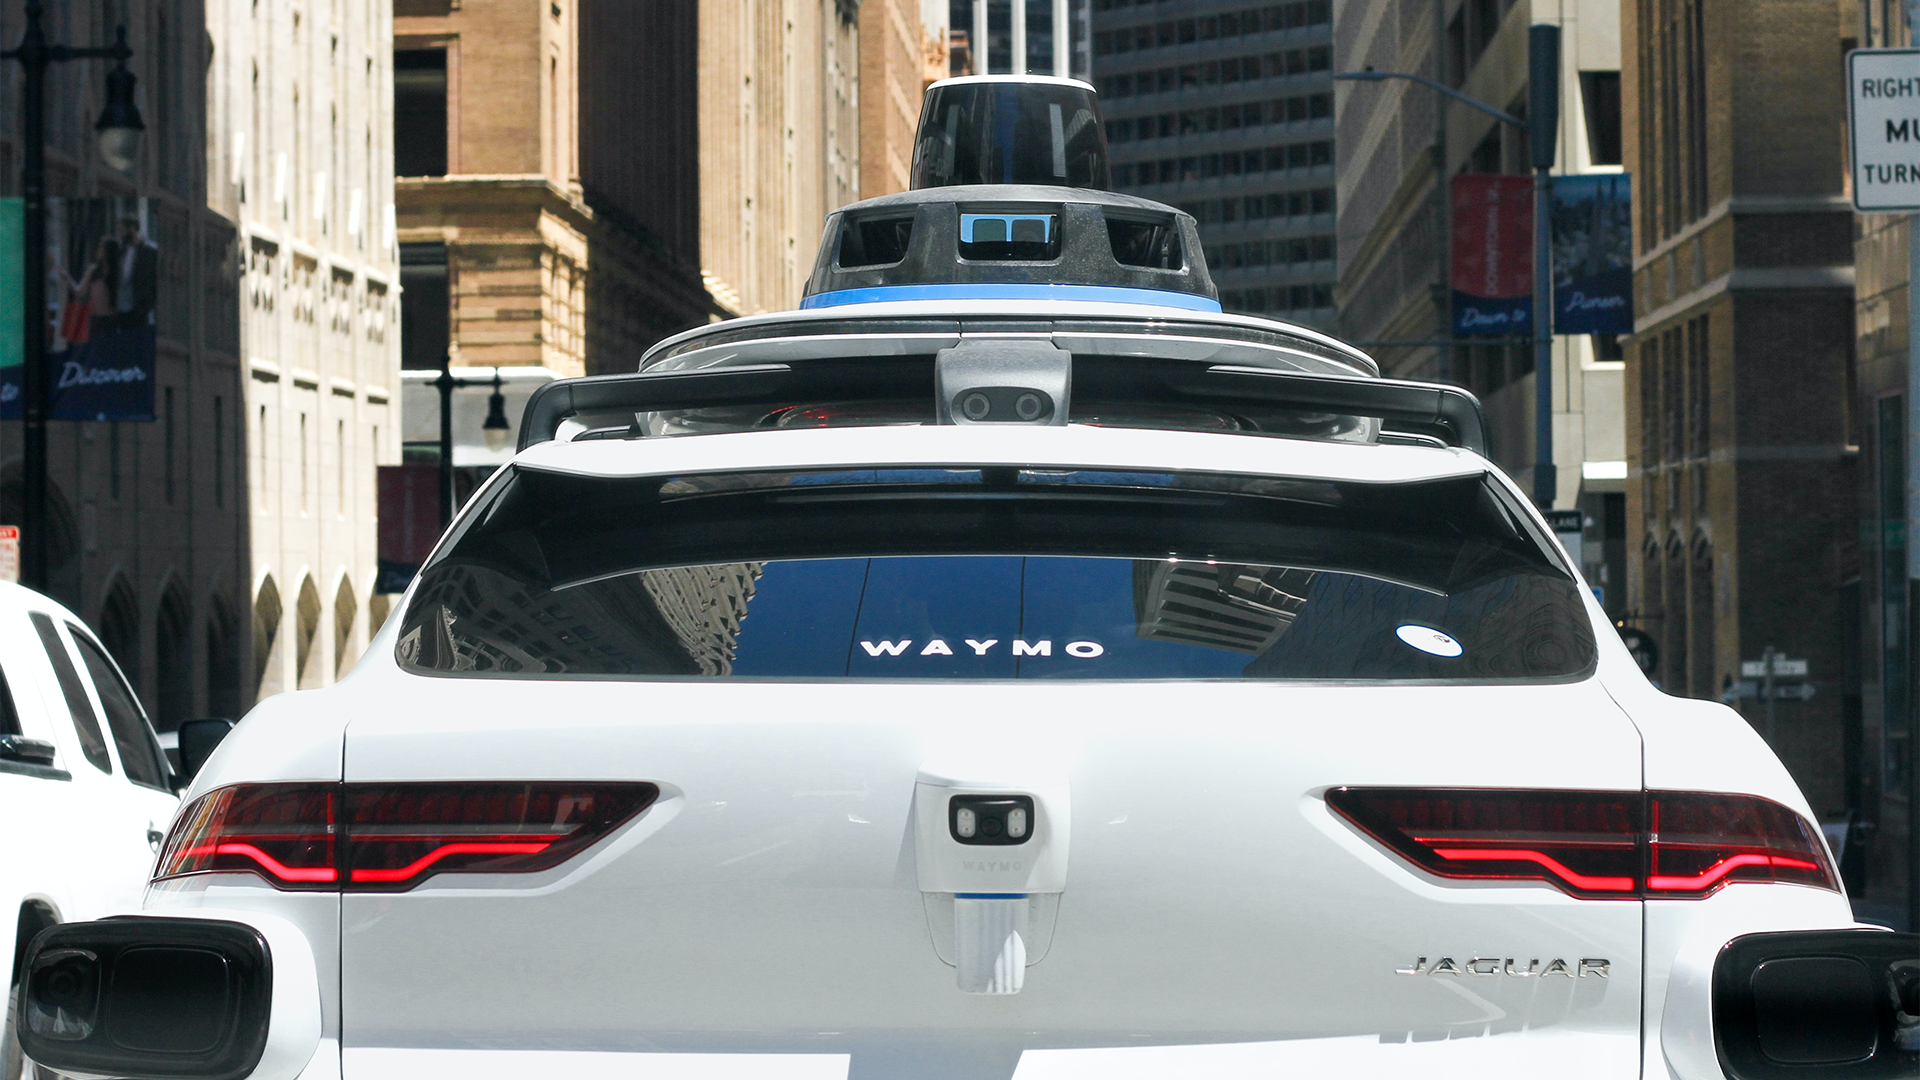 Back of a white Jaguar car with "Waymo" written on the back windshield.